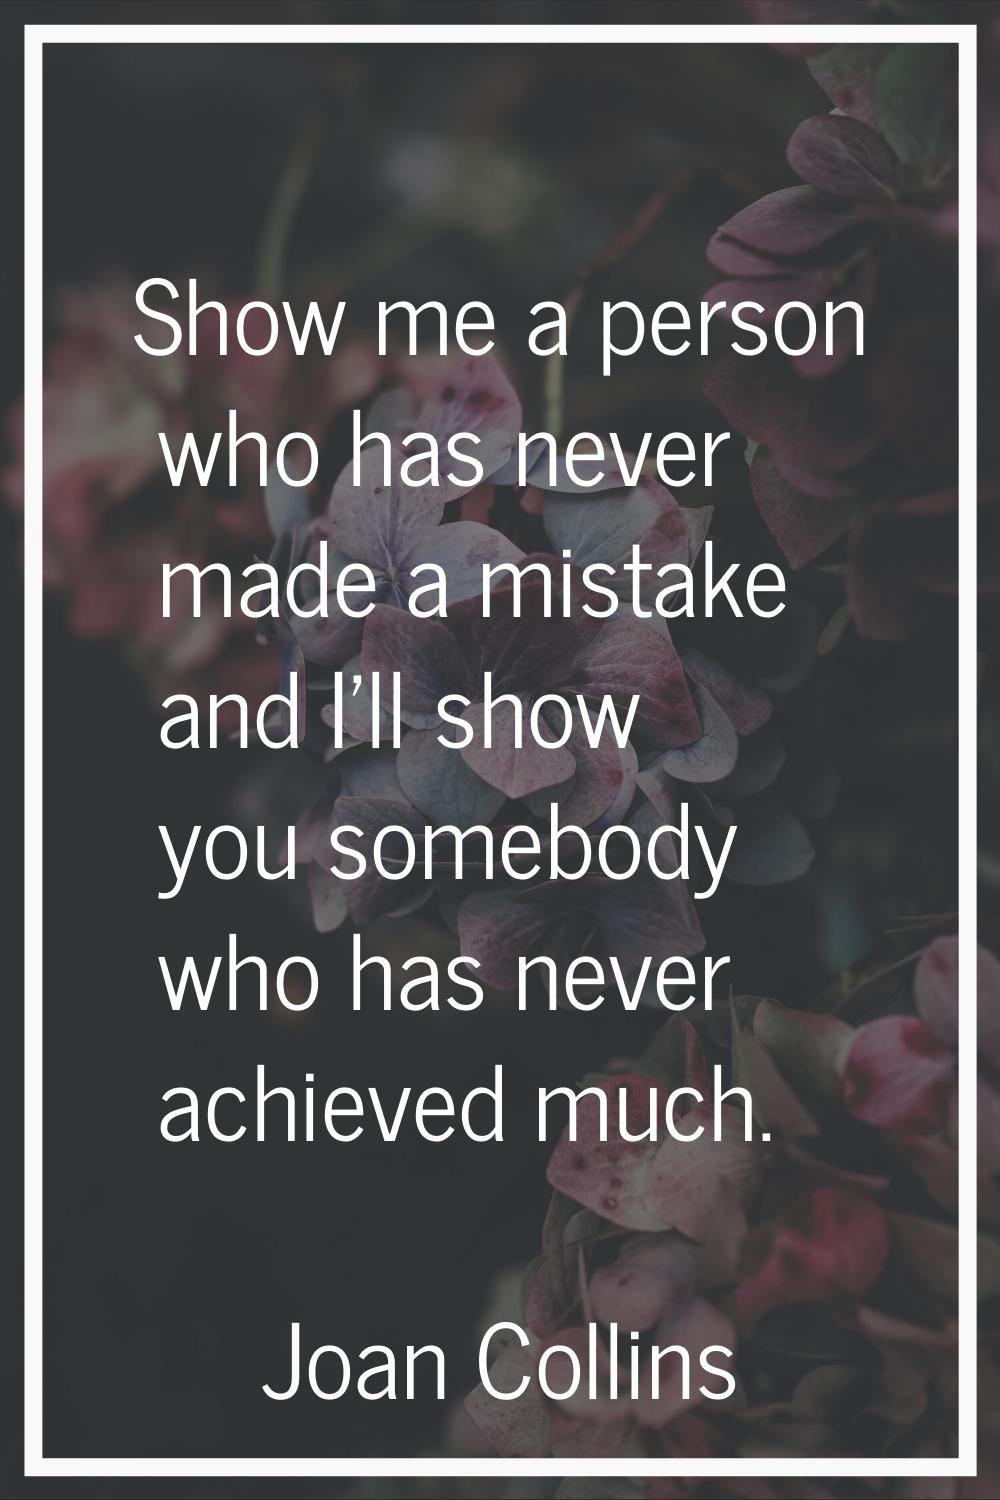 Show me a person who has never made a mistake and I'll show you somebody who has never achieved muc